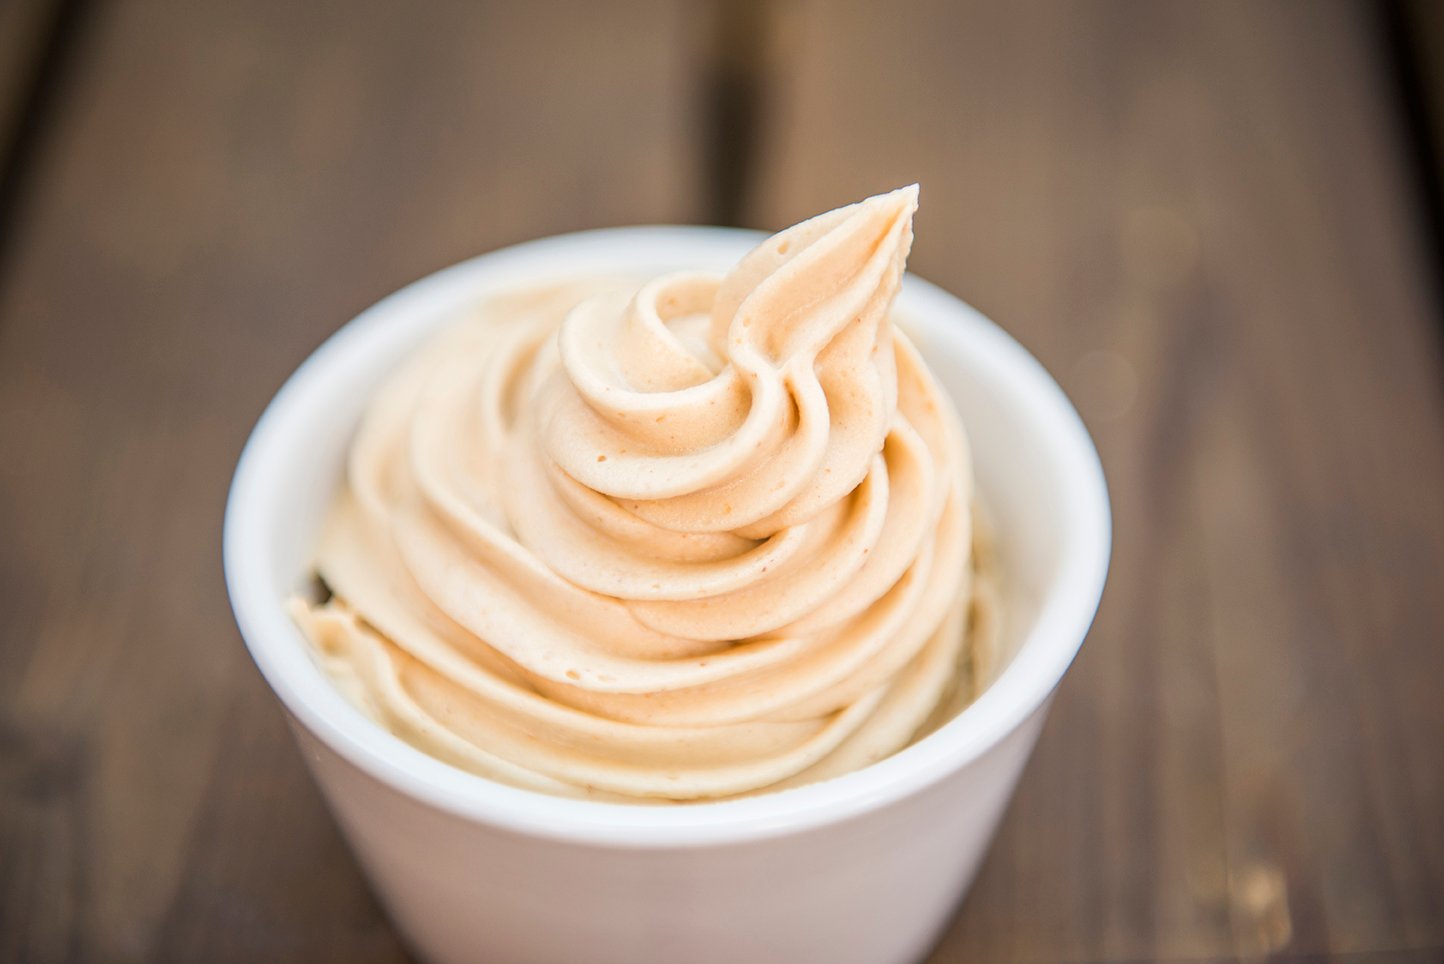 Peanut Butter Frosting